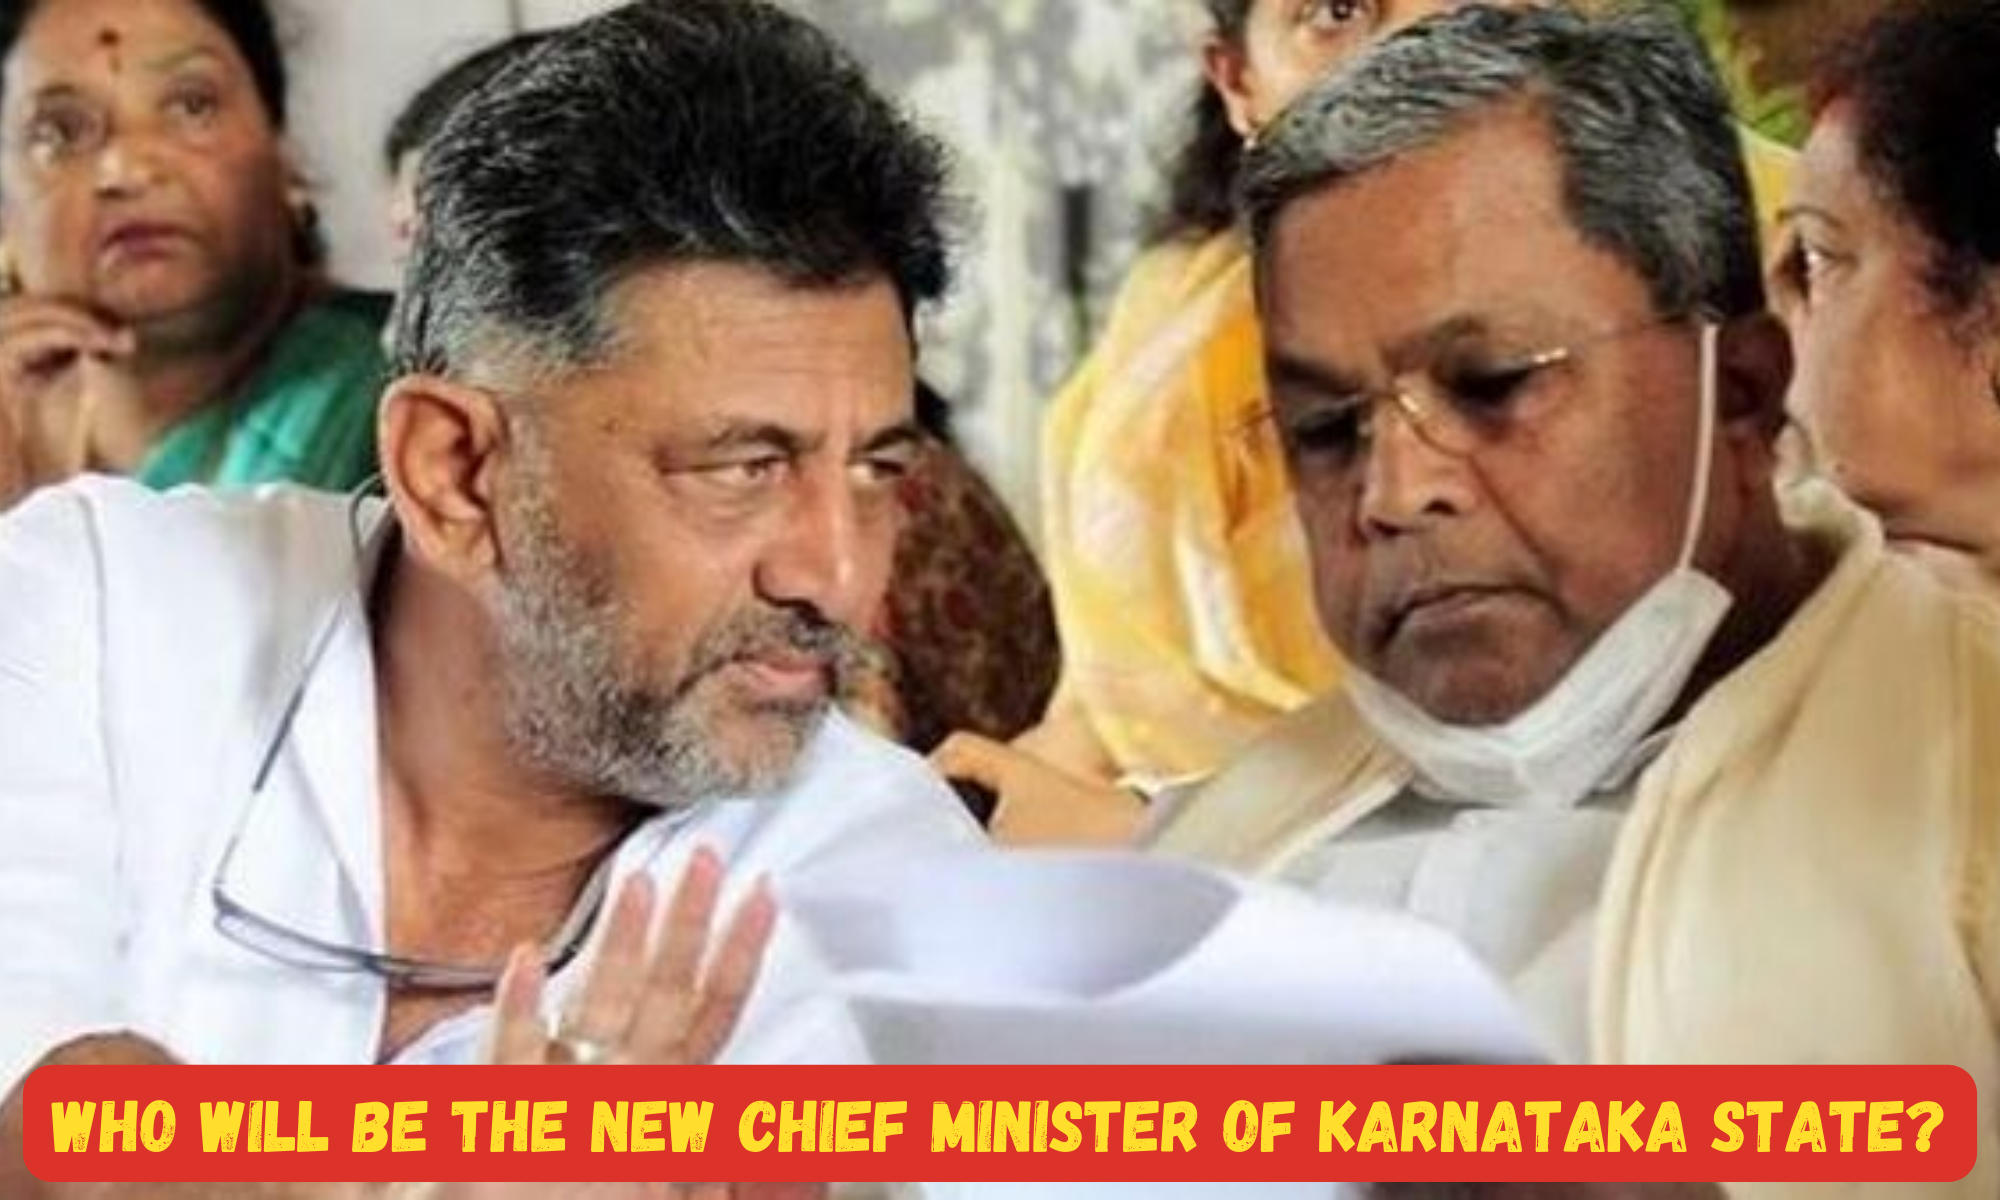 Who will be the new chief minister of Karnataka state?